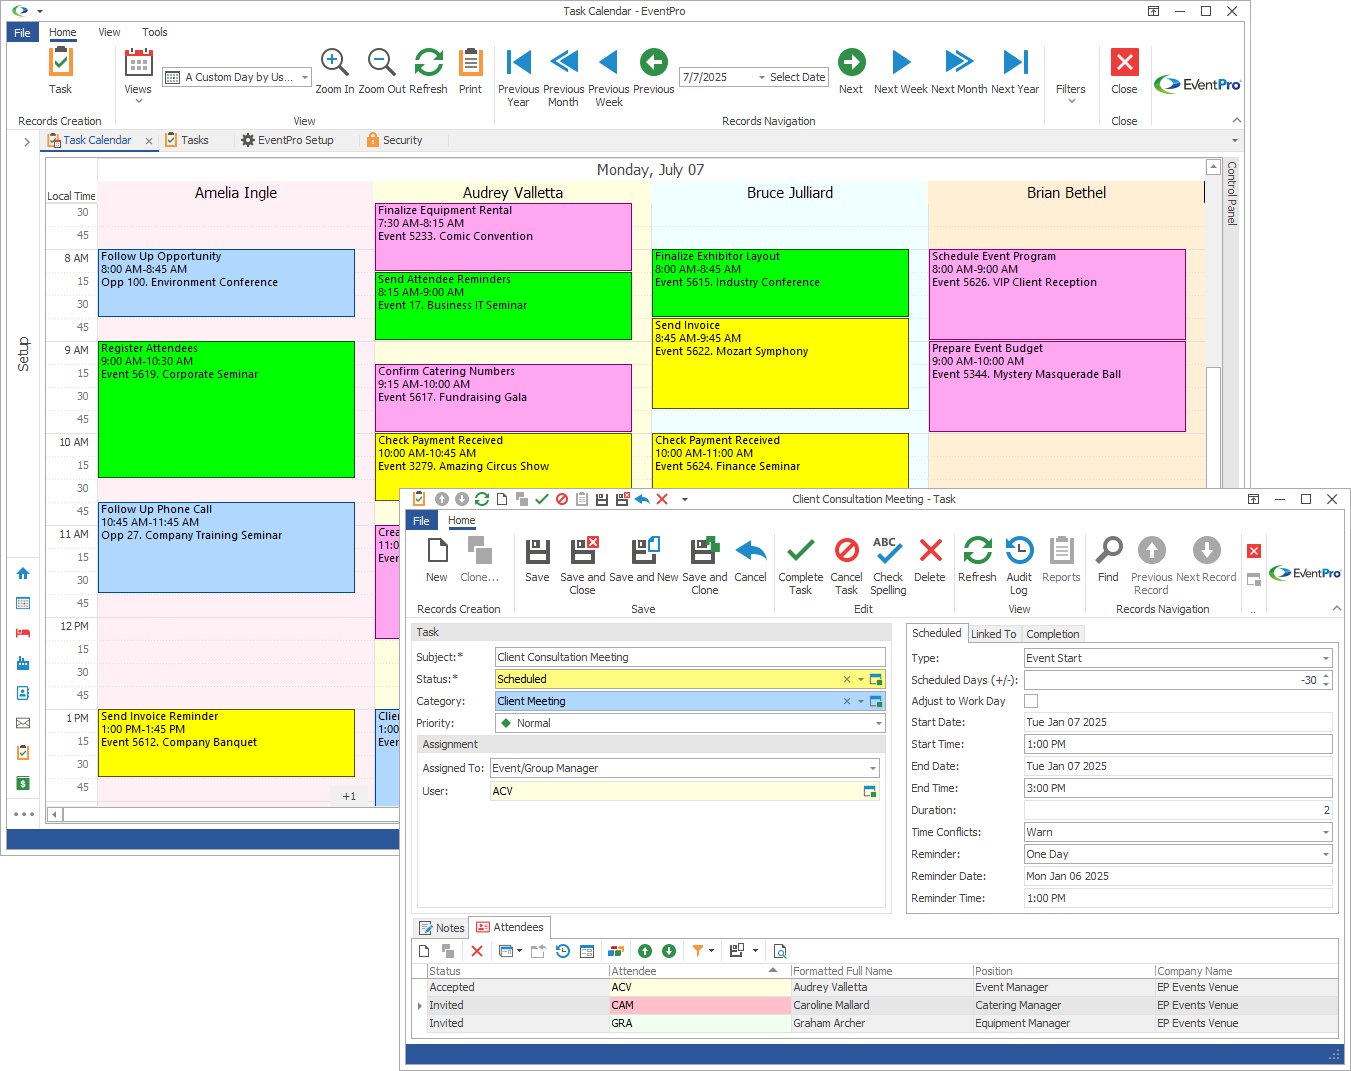 EventPro’s Task Management: View to-do tasks for yourself and others in the shared Task Calendar. You can create tasks, set deadlines, assign users, and schedule reminders. Tasks are linked to the relevant event, account, etc. for easy reference.